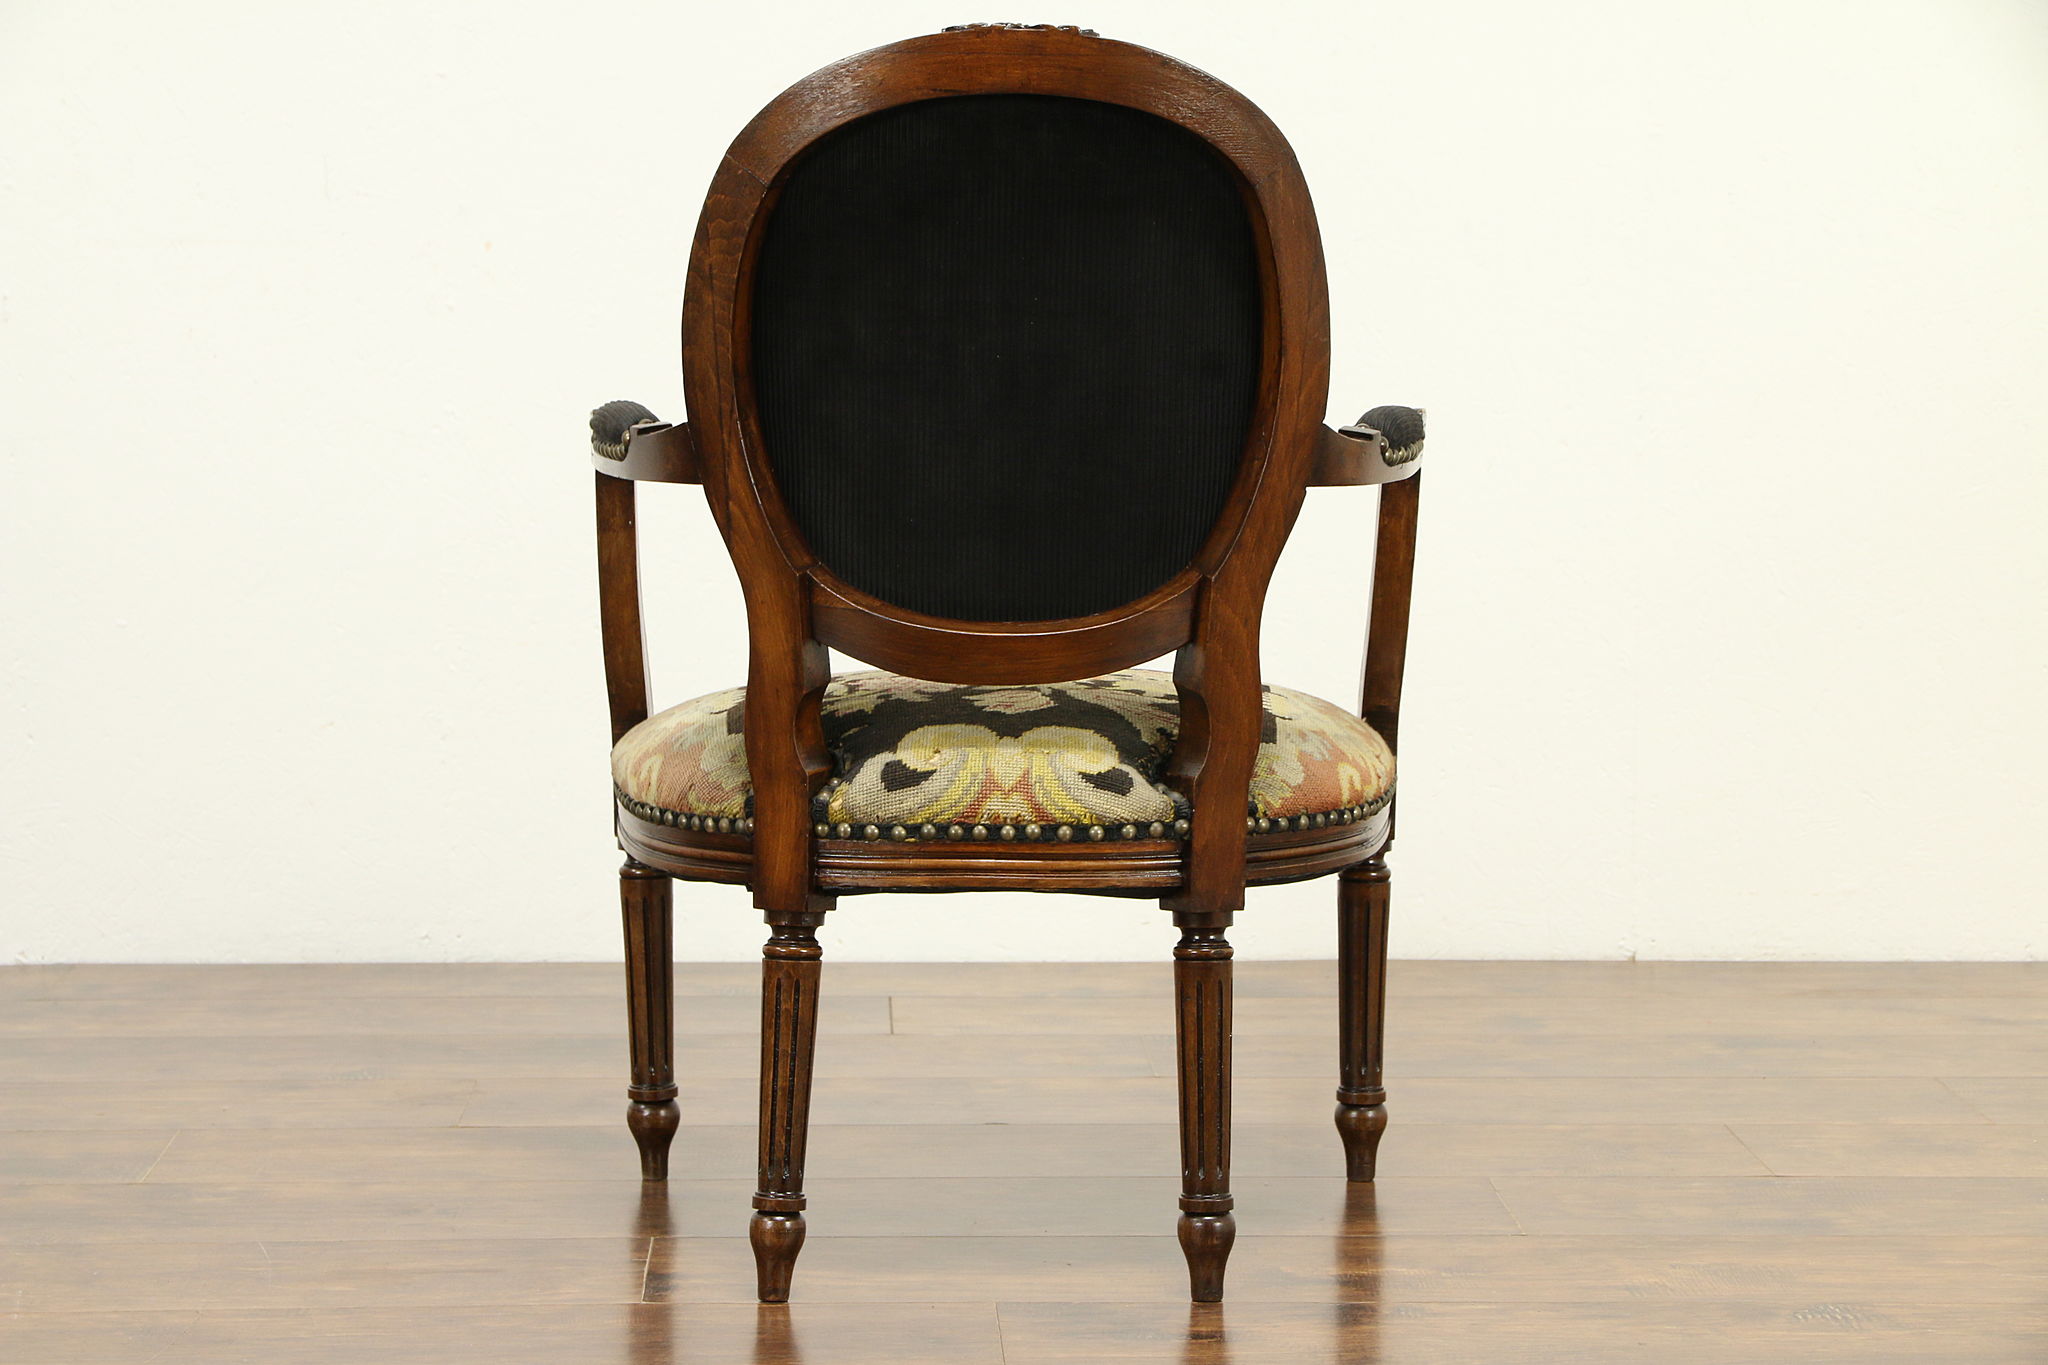 19th century French Louis XVI style arm chair with tapestry upholstery.